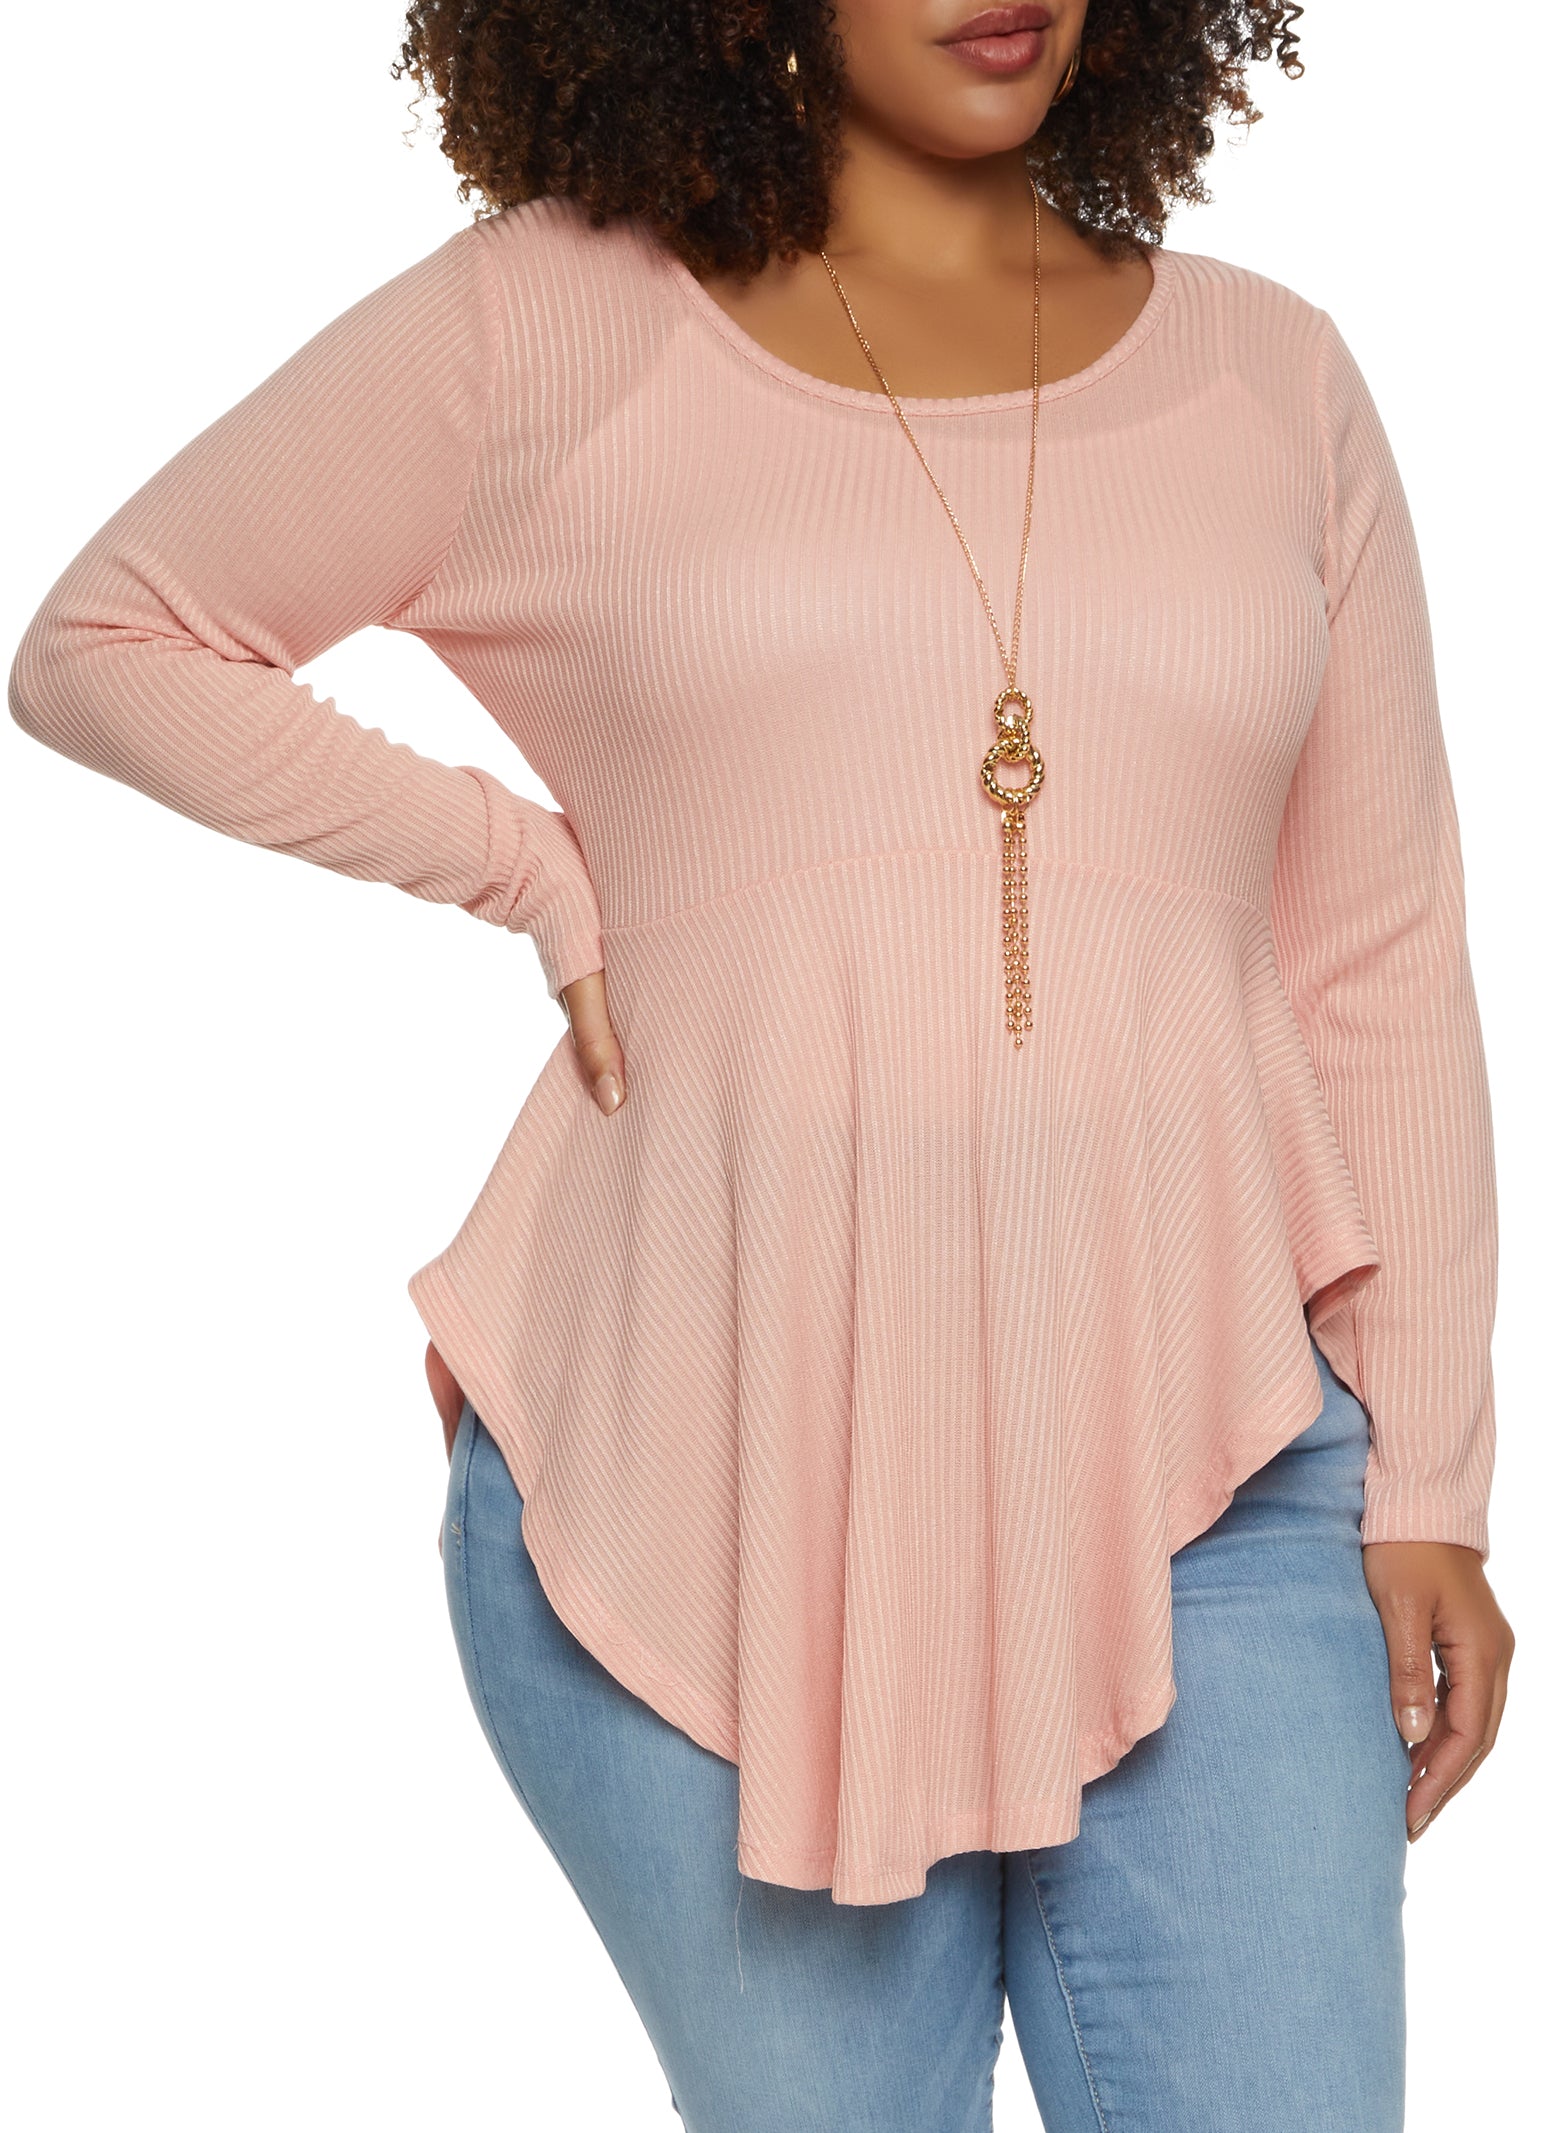 Women's Plus Size Clothing, Everyday Low Prices